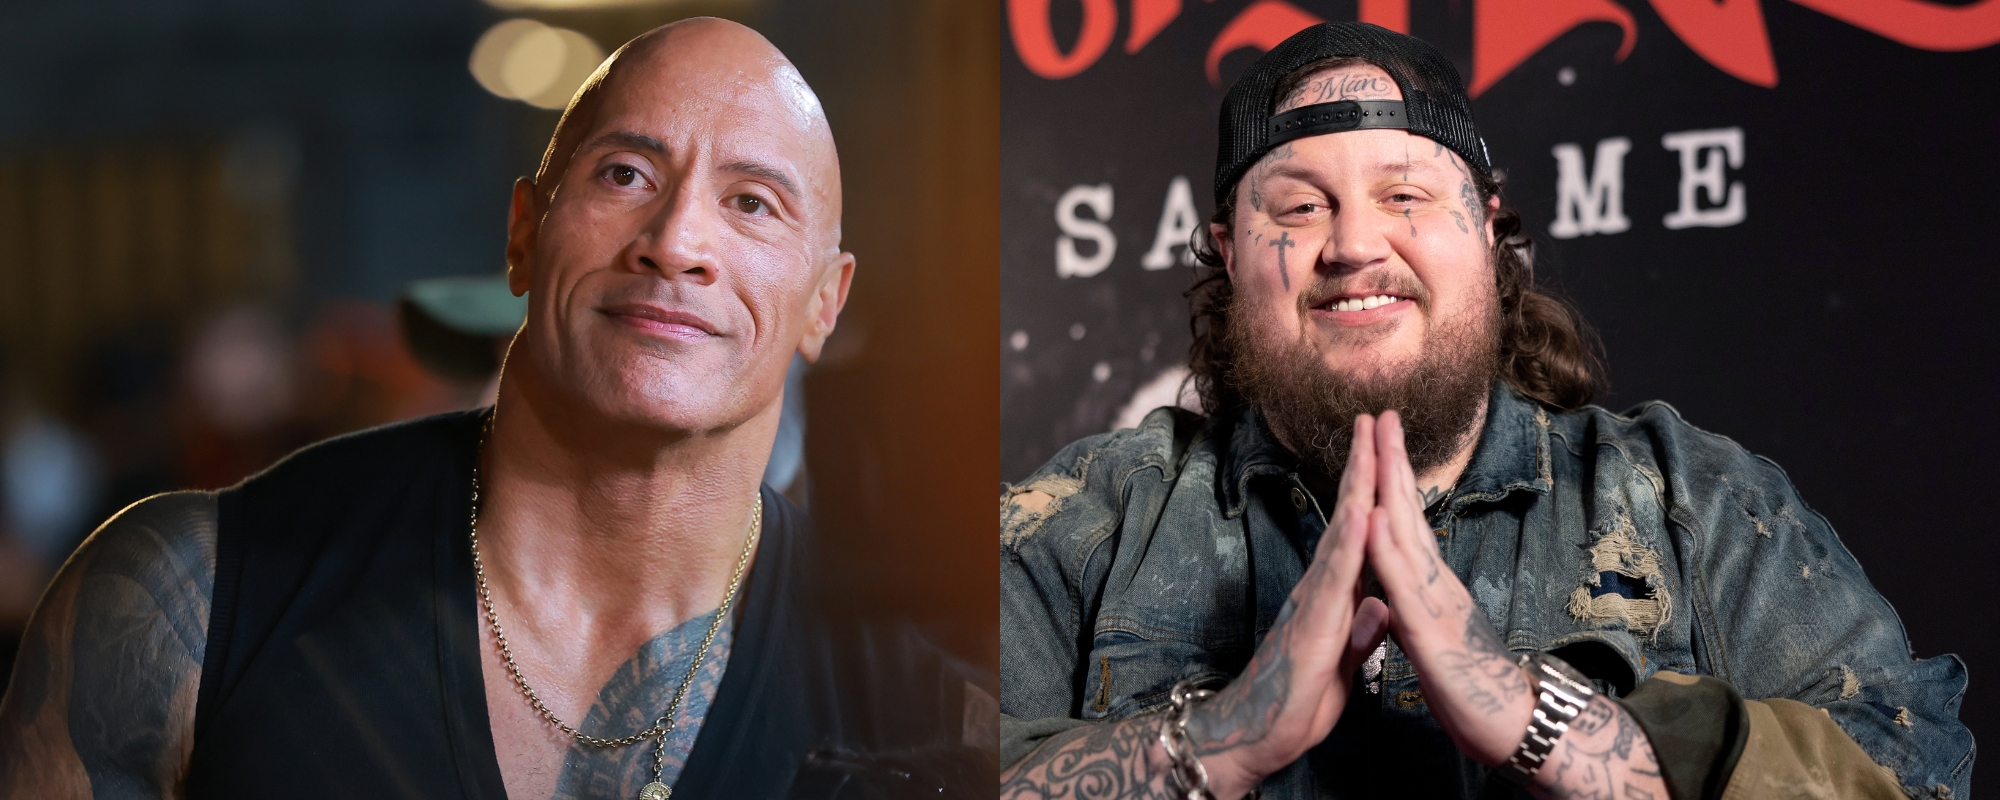 How Dwayne ‘The Rock’ Johnson Became the “Anchor” for Jelly Roll’s Success: “He’s Really Been With Me From the Beginning”